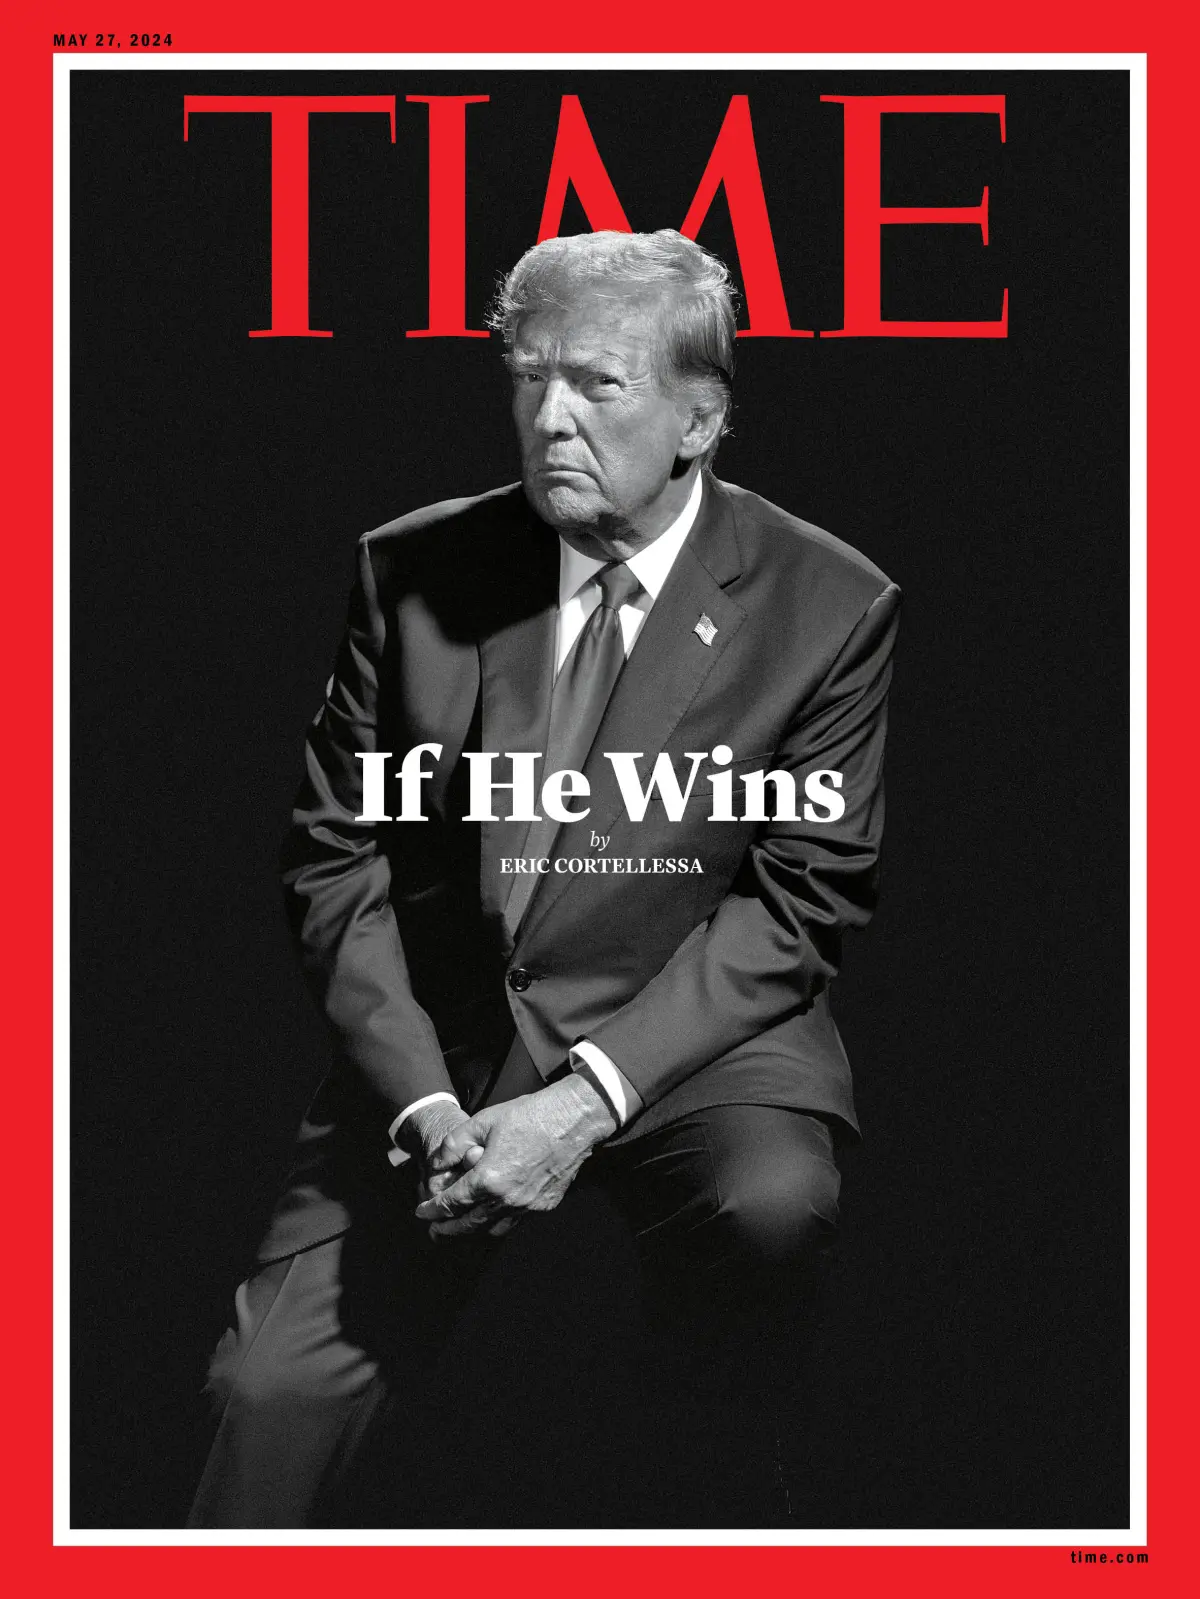 About that Time Magazine Interview of Donald Trump…